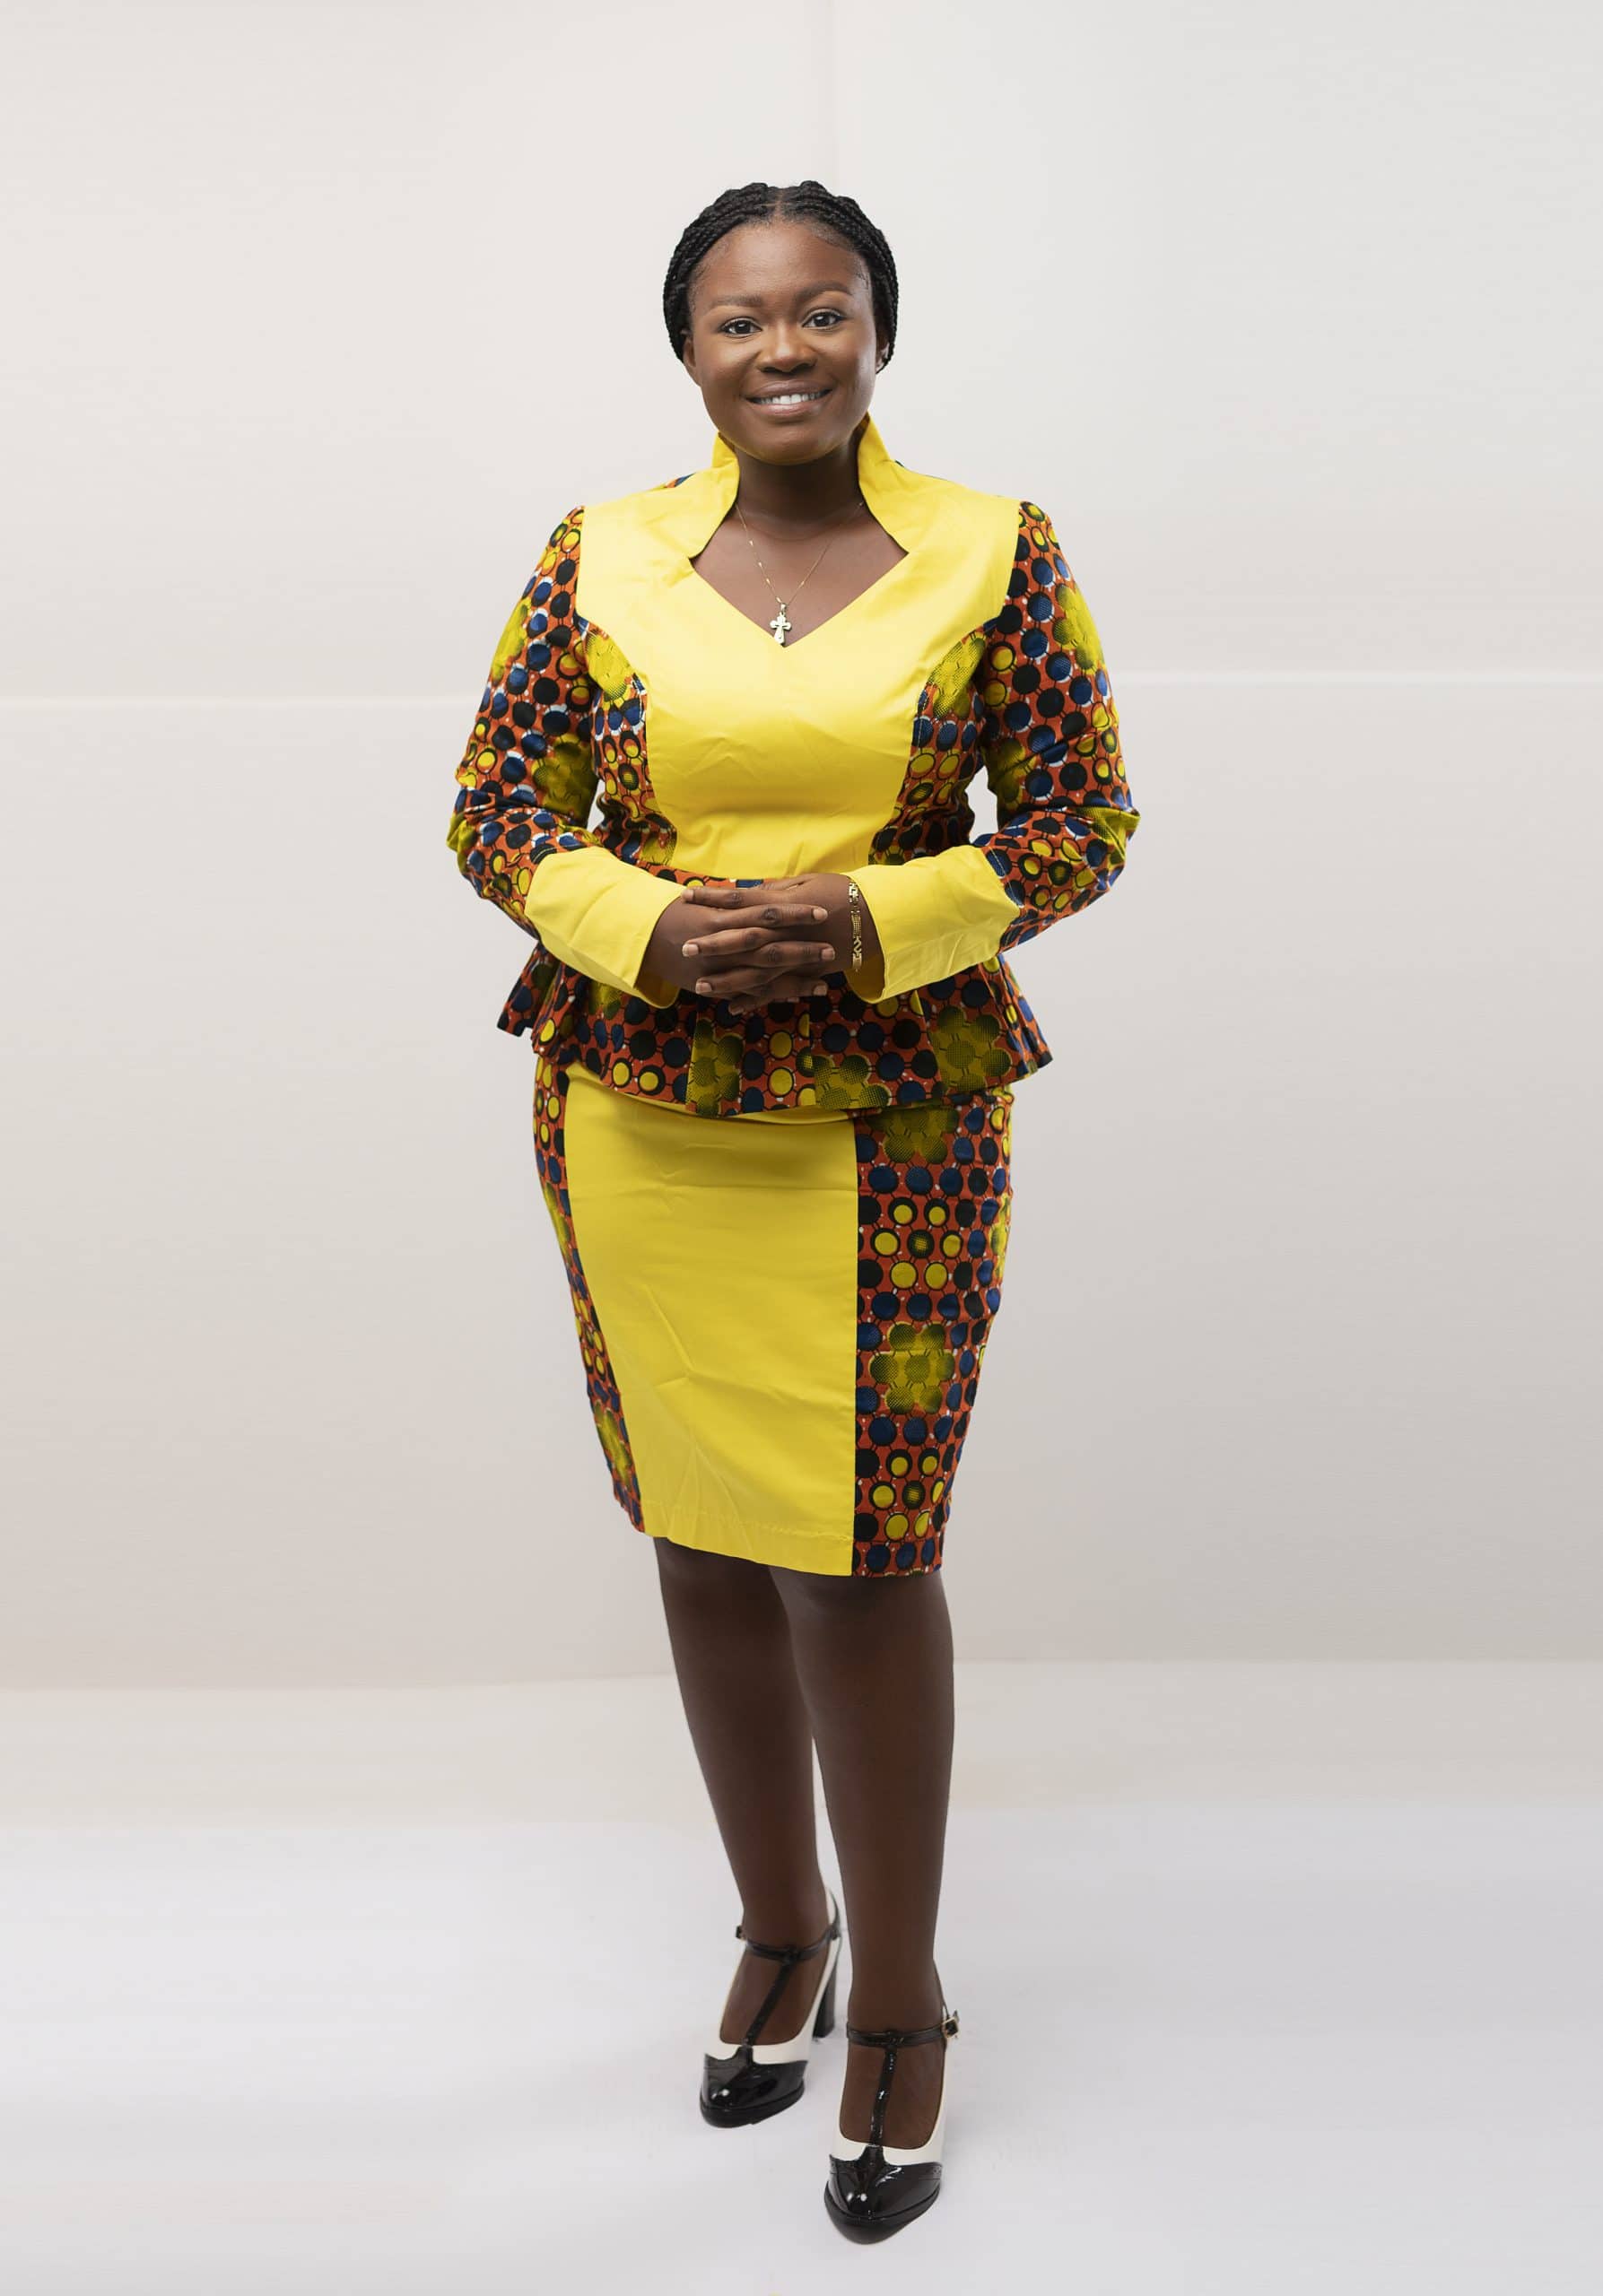 Frontal of model wearing our Zuri two piece matching skirt set in yellow, brown and blue African print. Features a statement collar and contrasting solid yellow panel on front and cuffs.